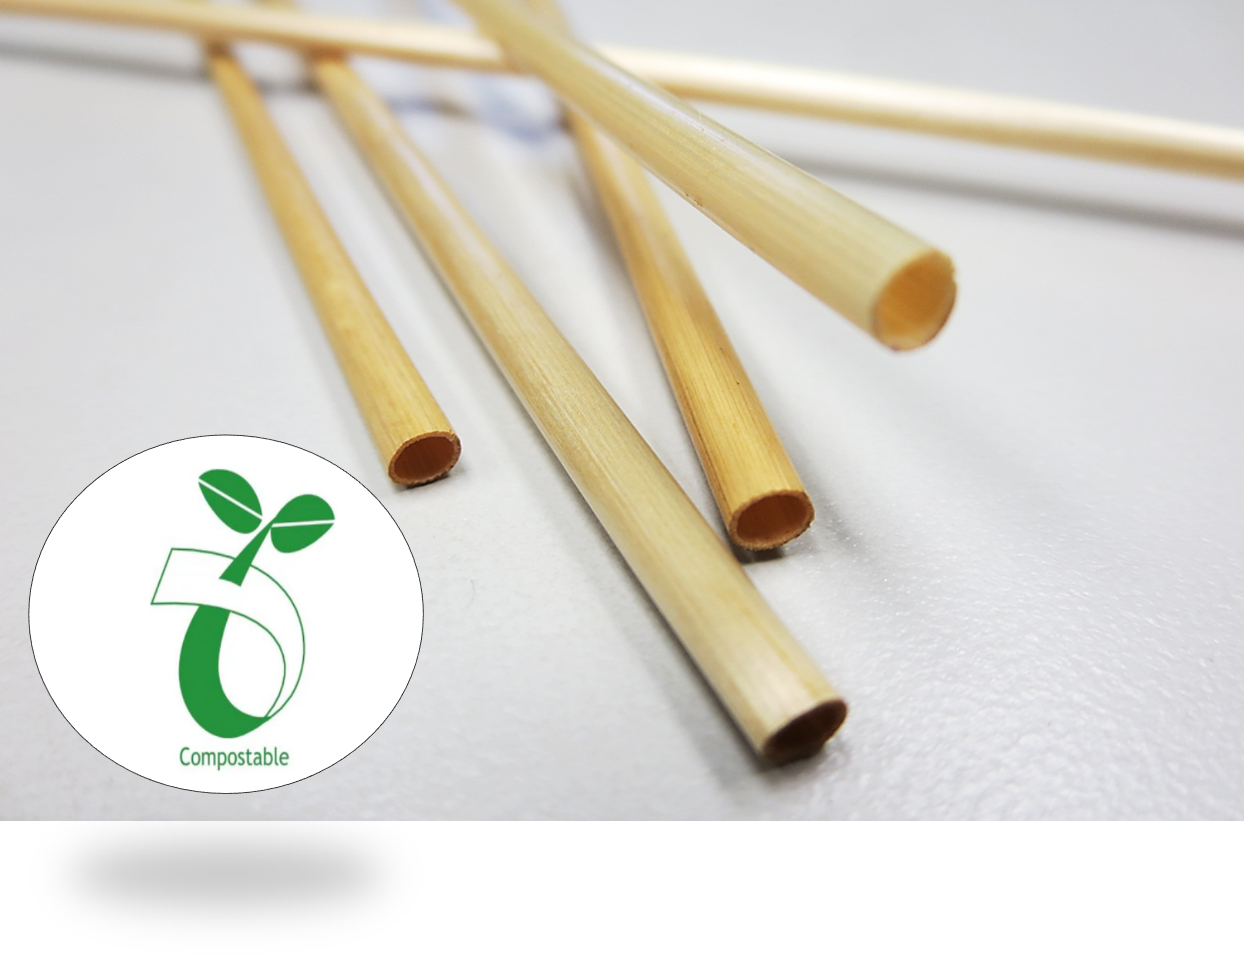 These Real Straw Compostable Wheat Cocktail Straws offer an environmentally-friendly alternative to single-use plastic type straws. Made from 100% natural, gluten-free wheat, they feature a safe, durable, and eco-friendly design. Perfect for restaurants, parties, or other gatherings, this set of 5000 straws is an easy way to reduce negative impact on the environment.